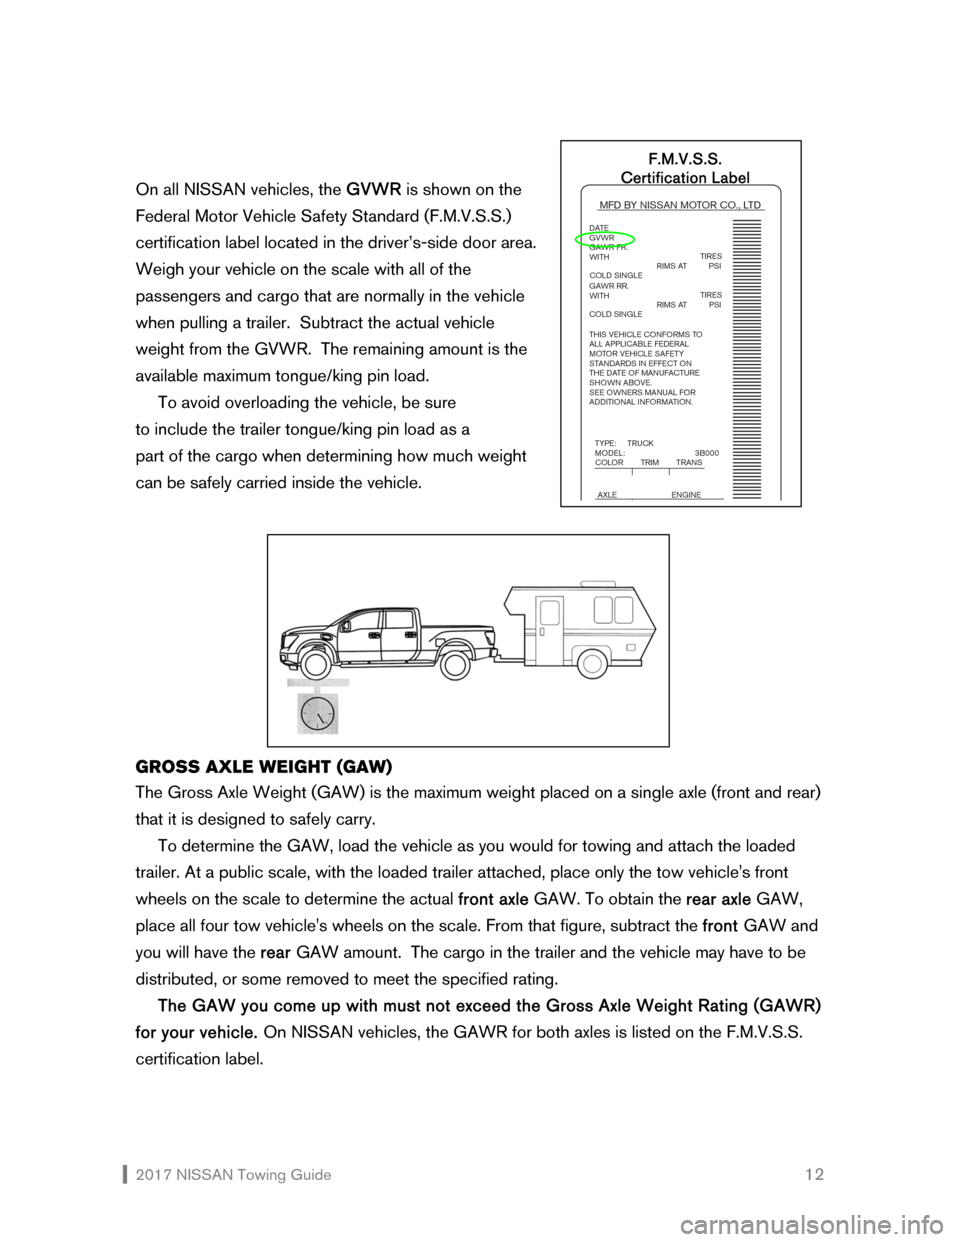 NISSAN ARMADA 2017 2.G Towing Guide  2017 NISSAN Towing Guide    12  
On all NISSAN vehicles, the GVWR is shown on the  
Federal Motor Vehicle Safety Standard (F.M.V.S.S.) 
certification label located in the driver’s-side door area.  